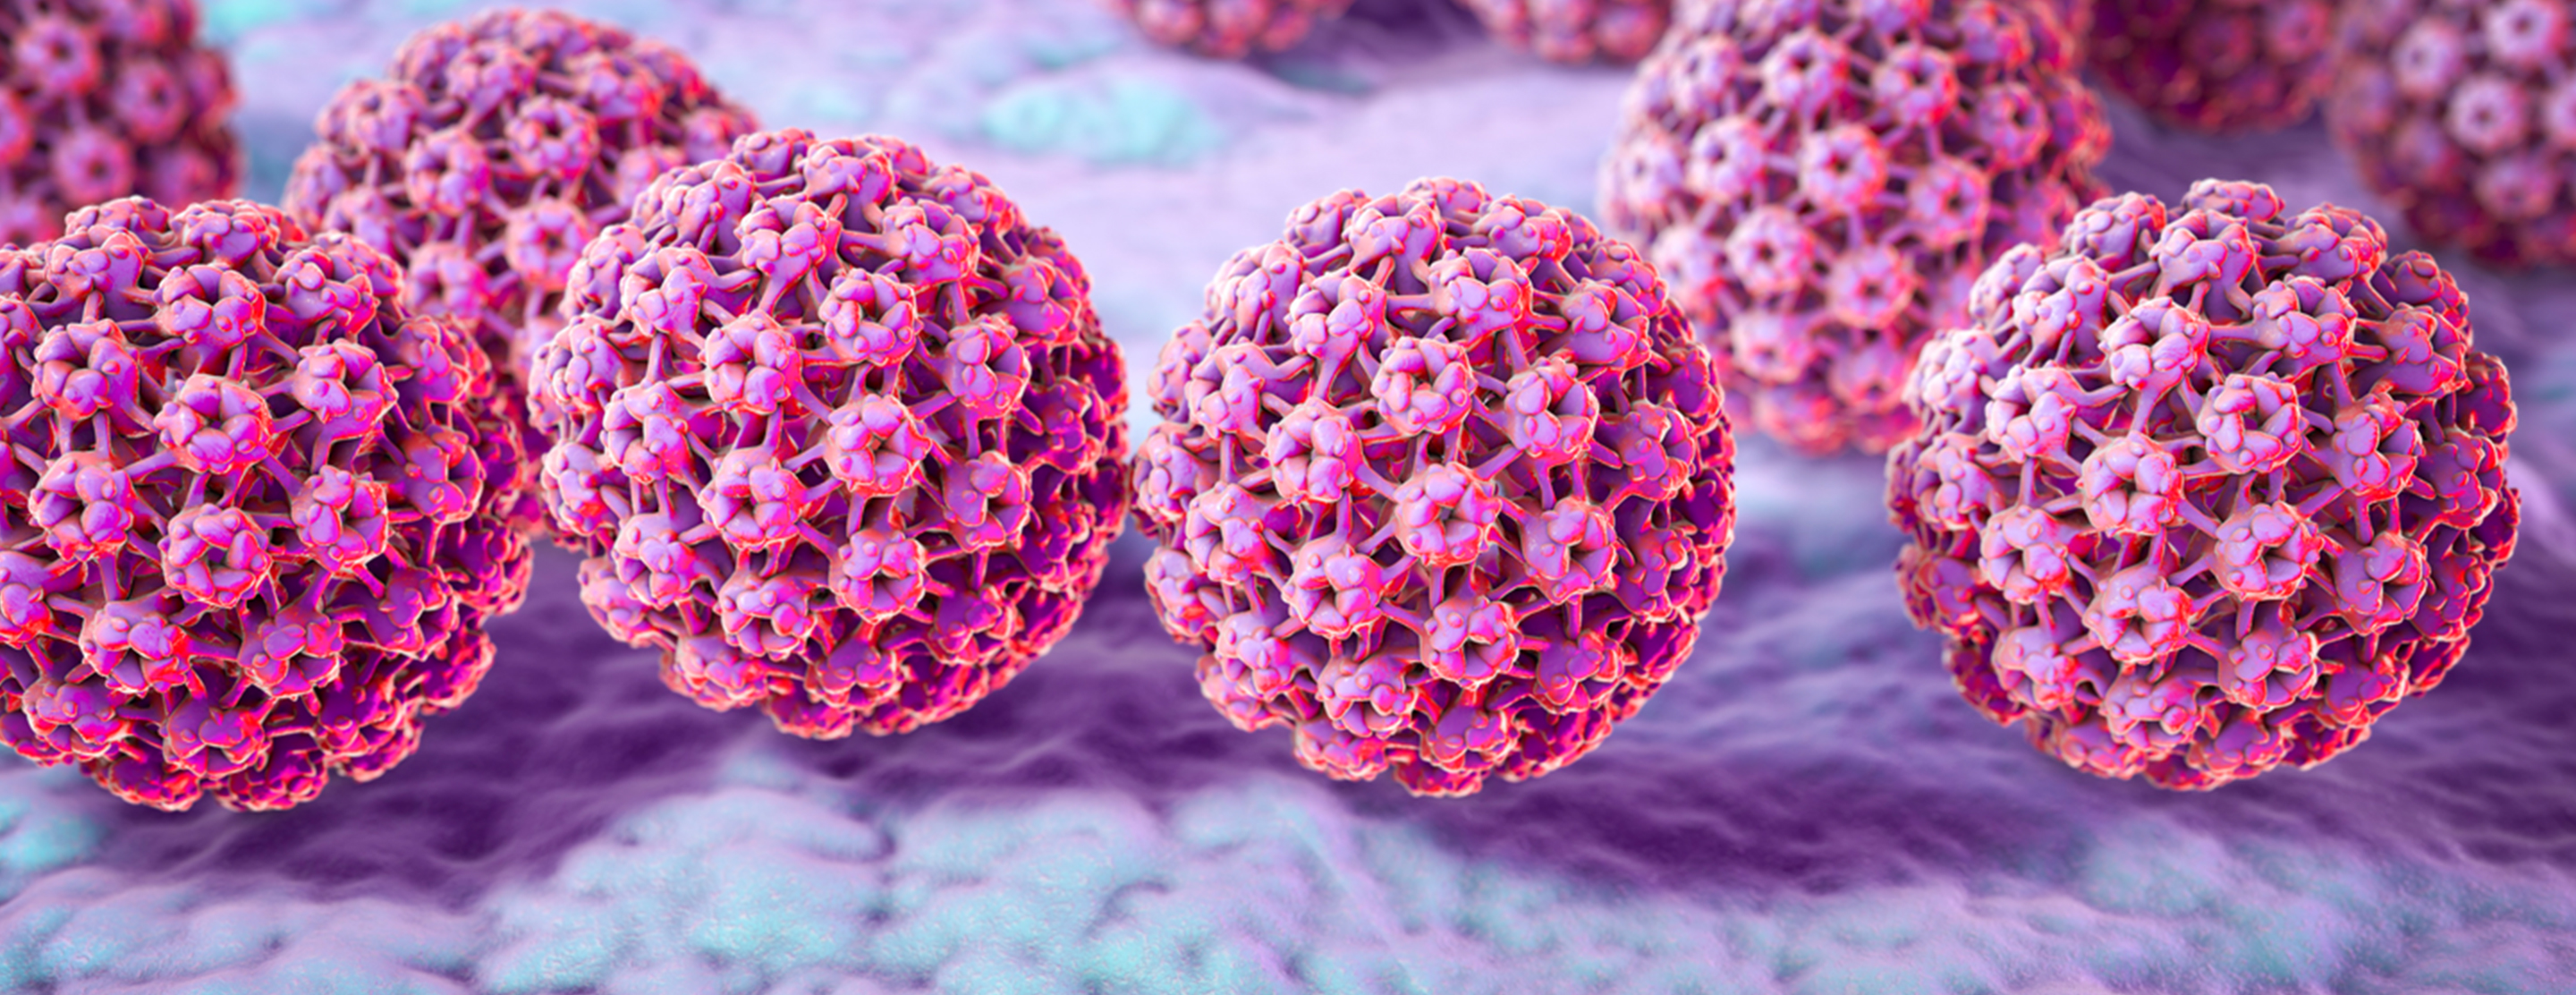 human papillomavirus can lead to cervical cancer